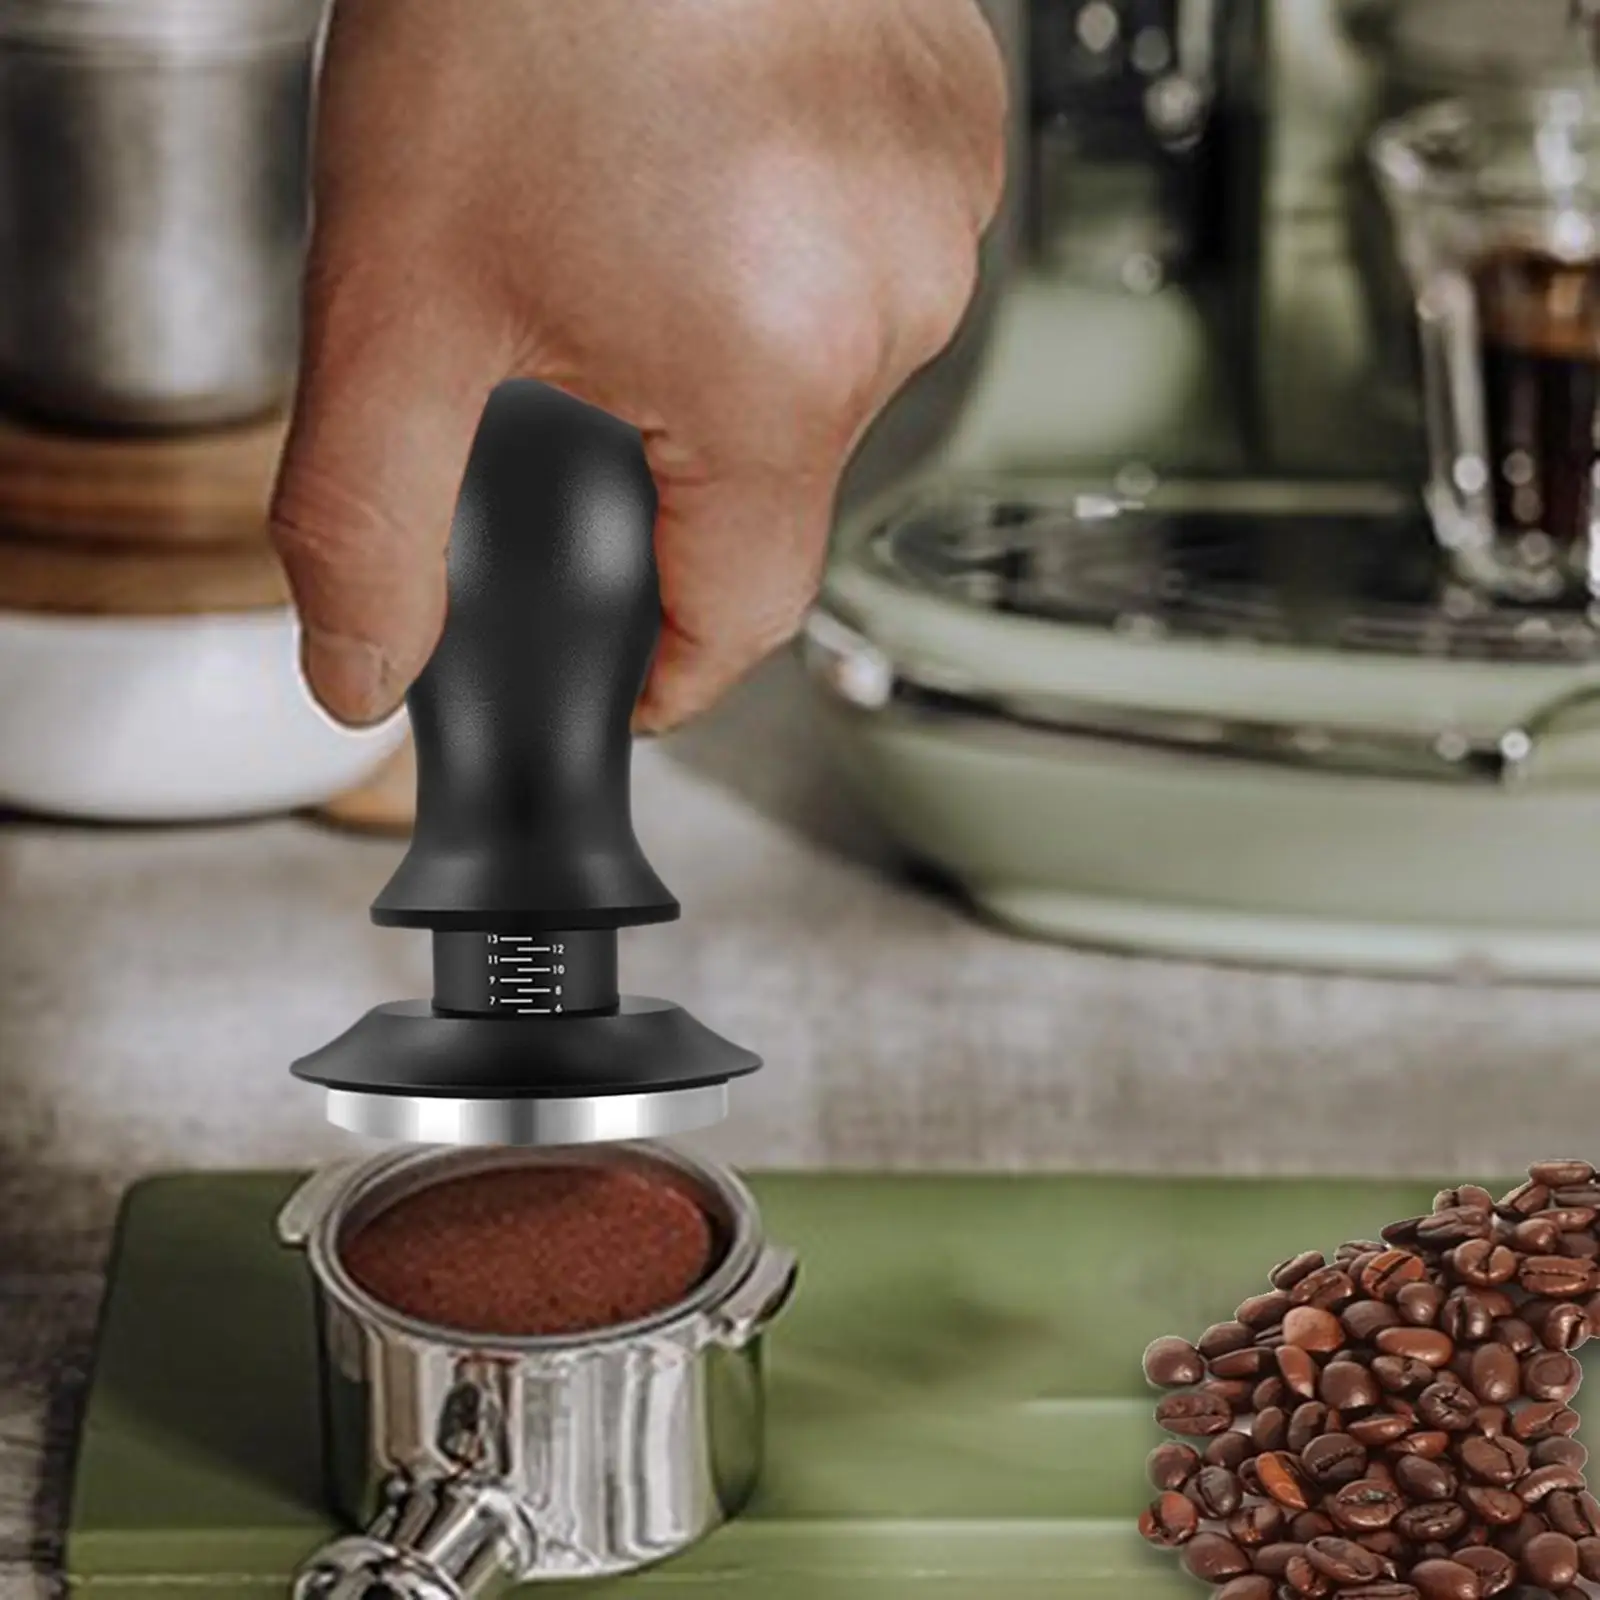 Professional Espresso Tamper Coffee Bean Pressing Utensils with Scale Stainless